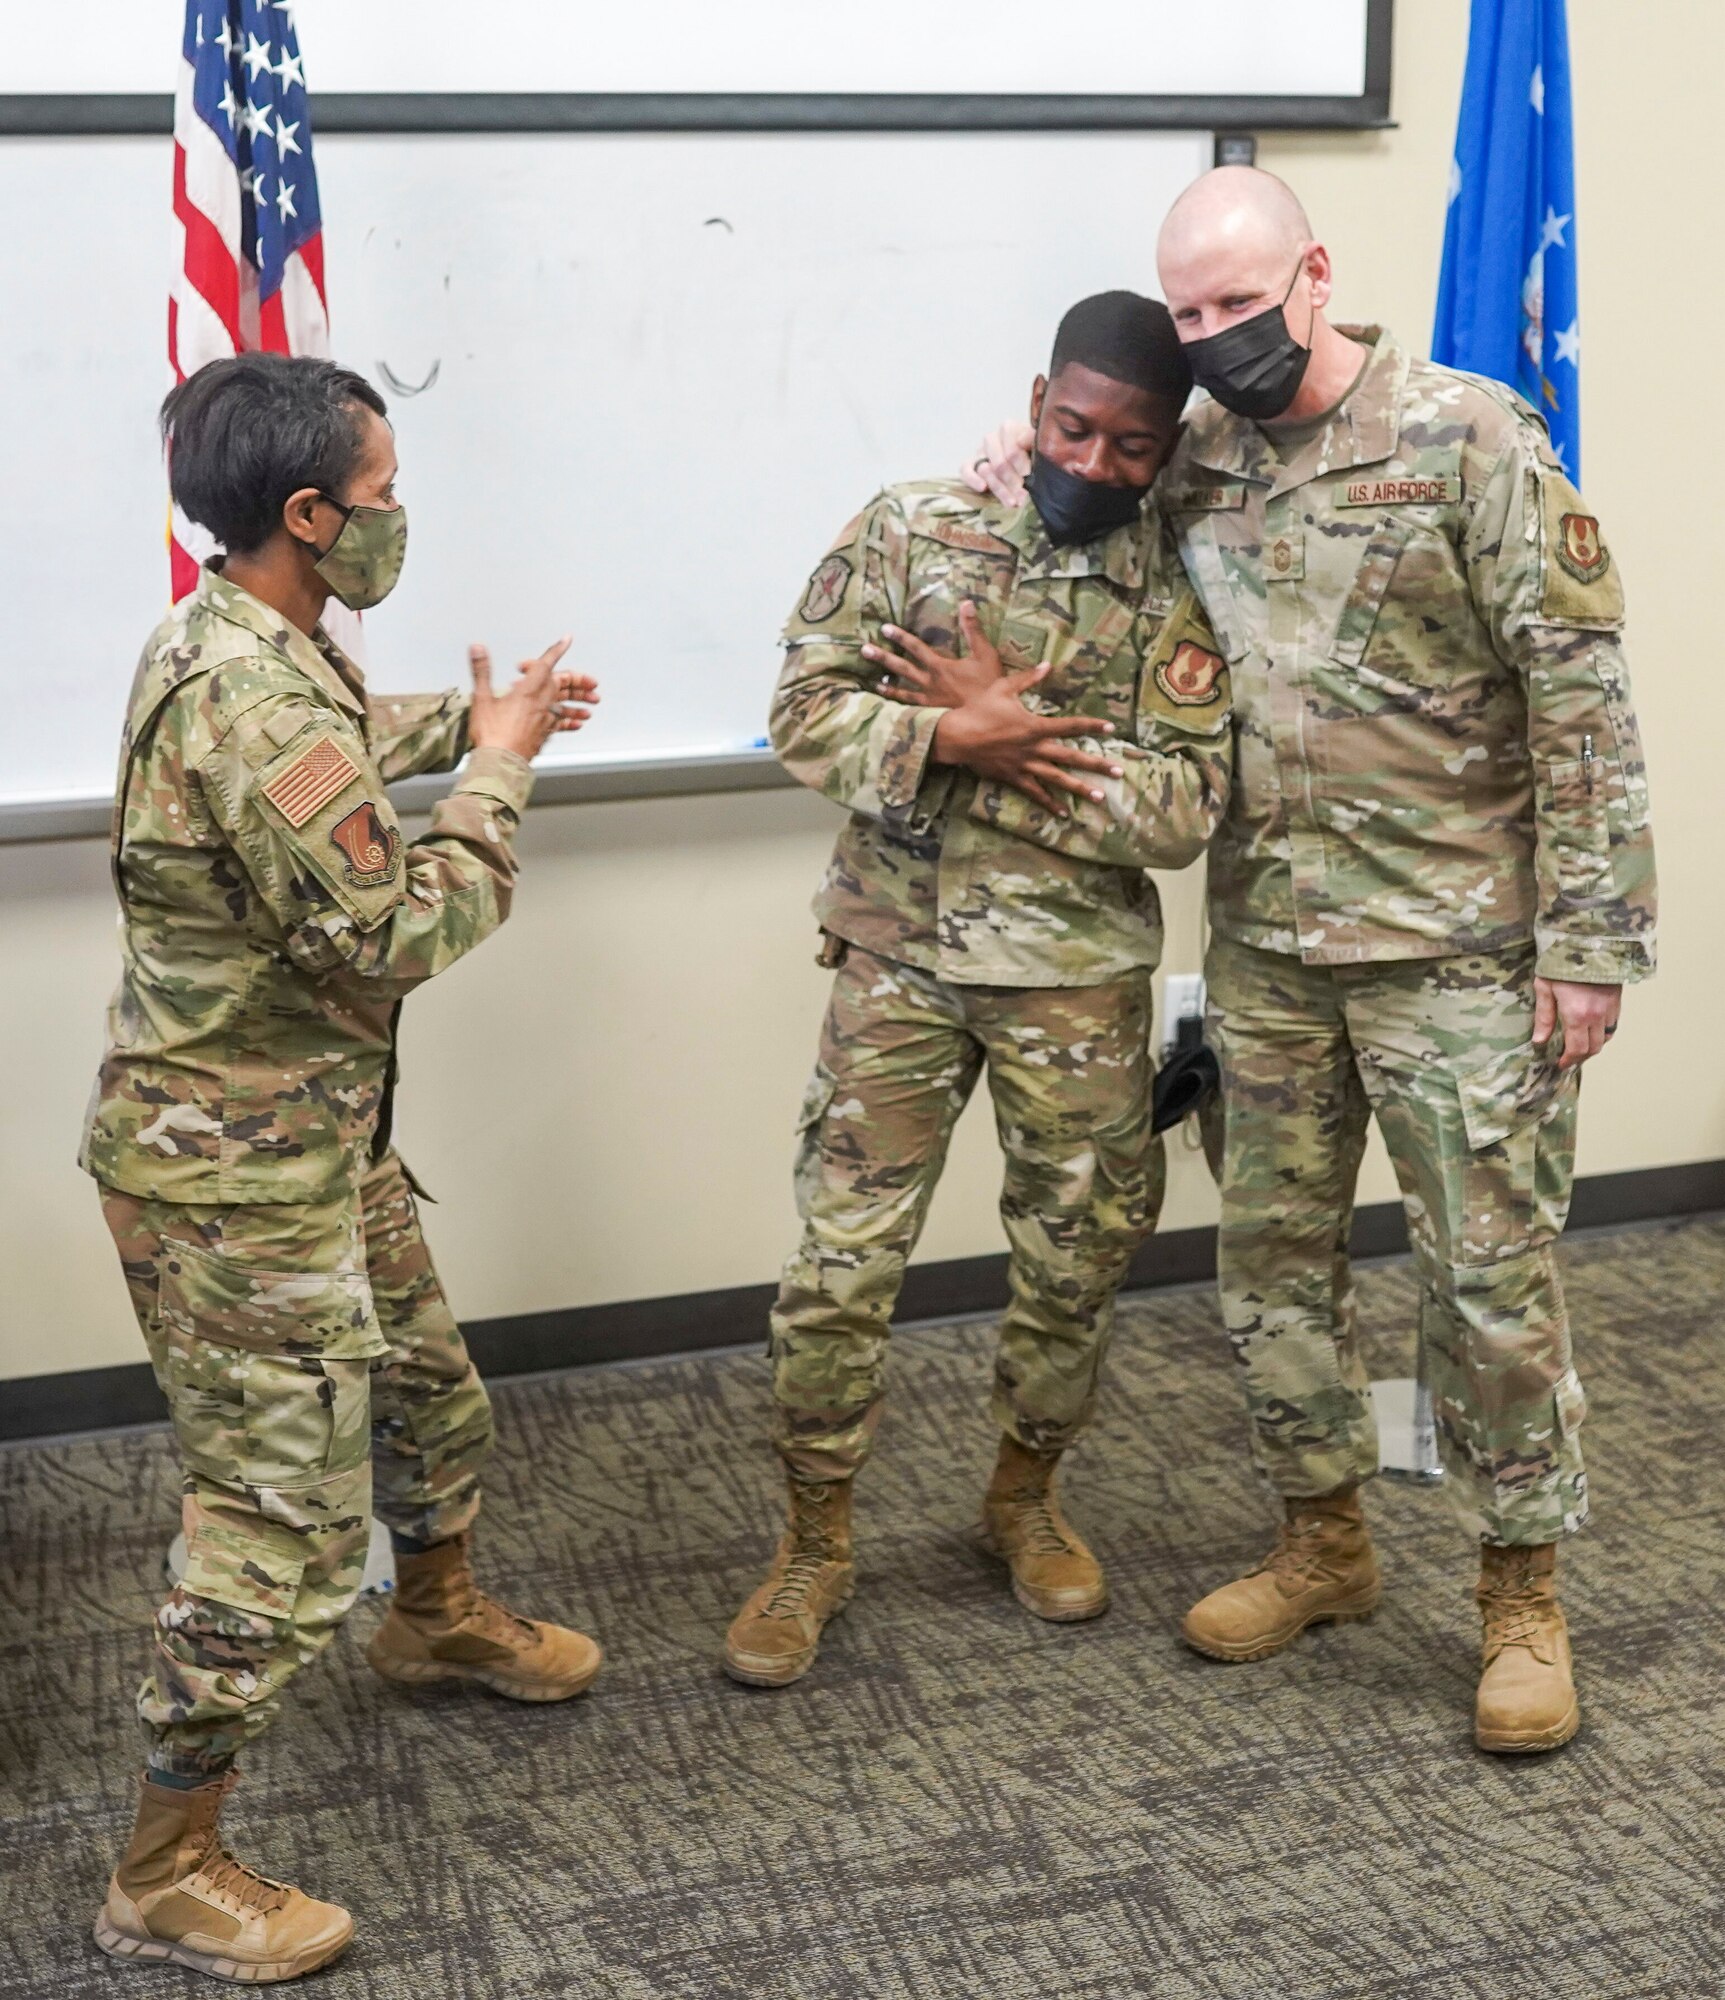 Chief Master Sgt. Christopher Walker, 75th Air Base Wing command chief, embraces Airman First Class Kamari Johnson, a defender with the 75th Security Forces Squadron, to congratulate Johnson’s acceptance to the U.S. Air Force Academy Preparatory School while Col. Jenise Carroll, 75th Air Base Wing commander, looks on March 18, 2021, at Hill Air Force Base, Utah.